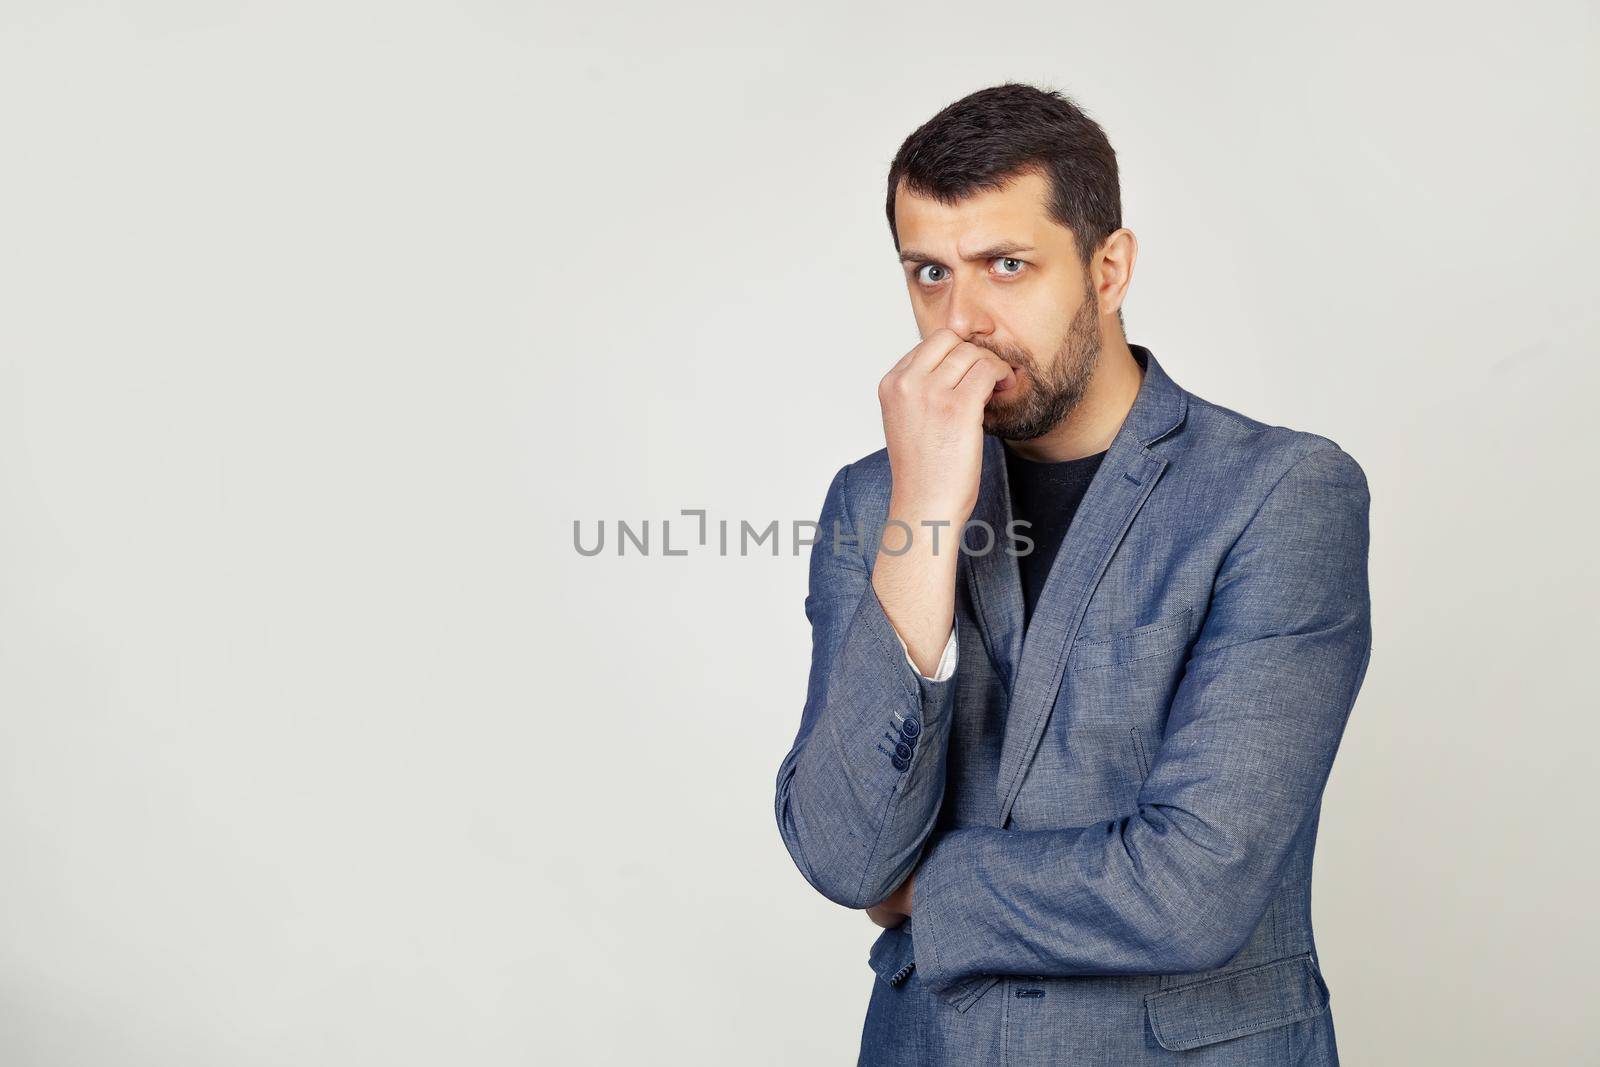 Young businessman with a smile, a man with a beard in a jacket, looks tense and nervous with hands on his lips, biting his nails. Anxiety problem. Portrait of a man on a gray background.